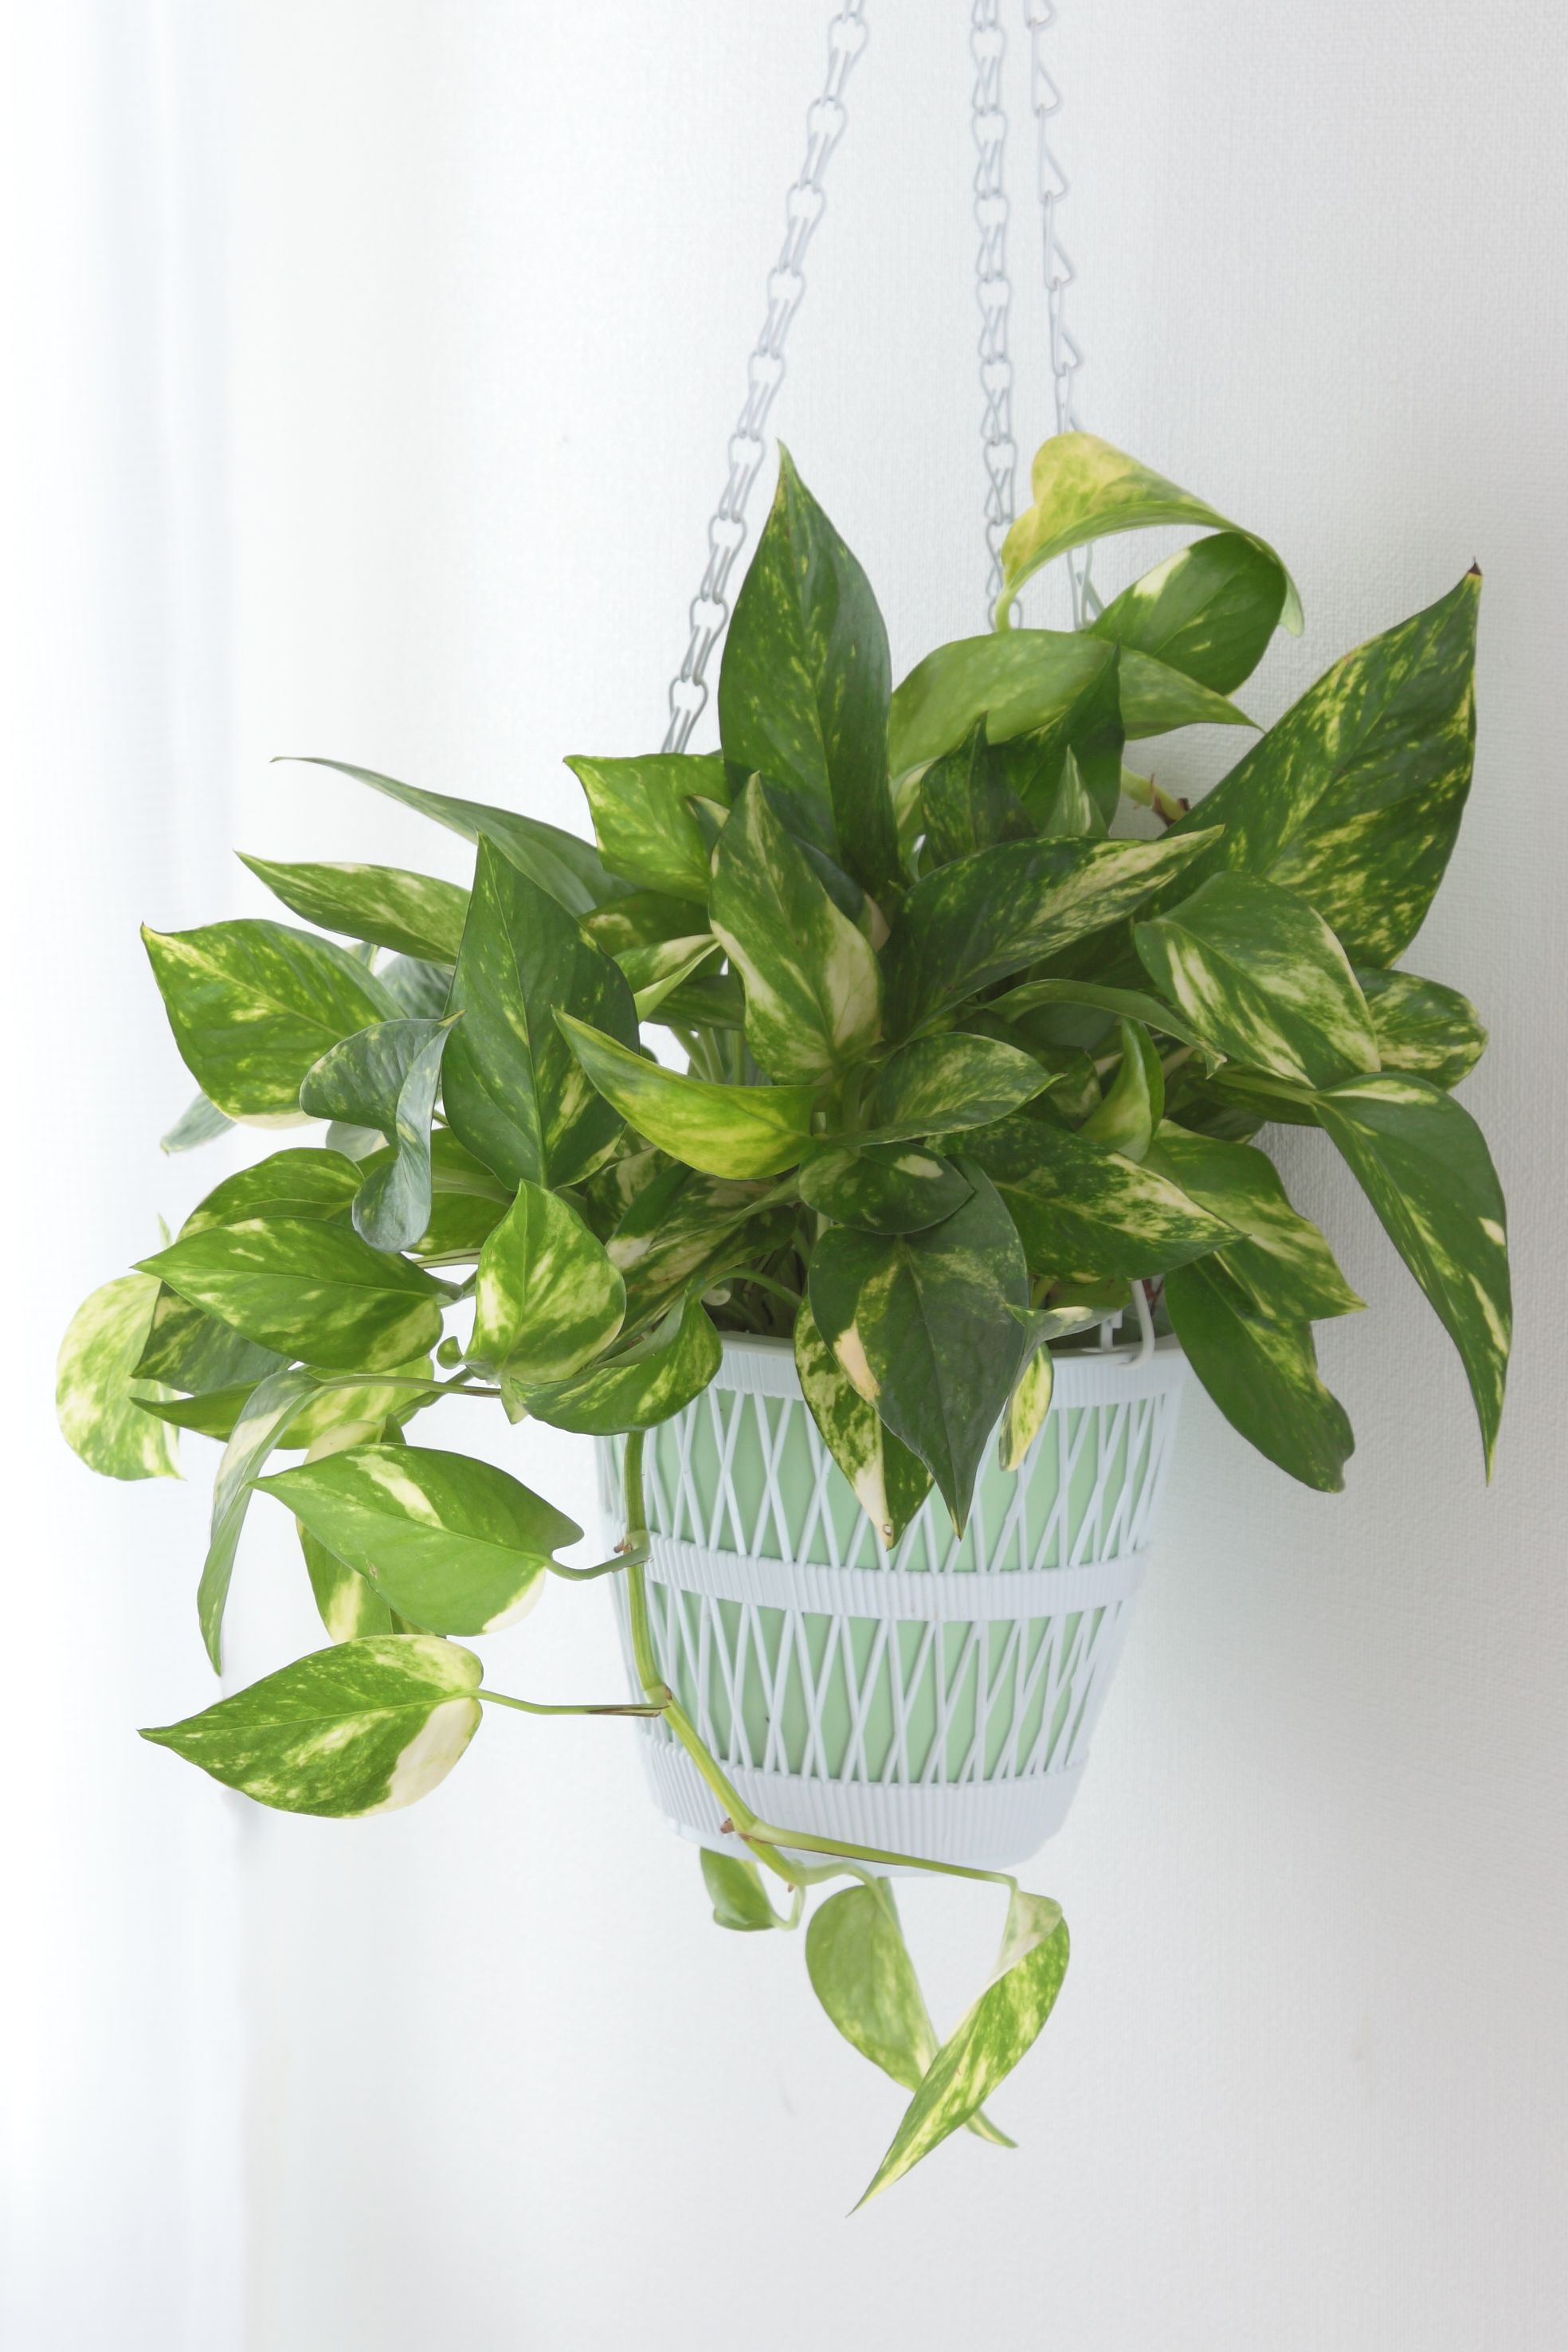 25 Easy Houseplants - Easy To Care For Indoor Plants